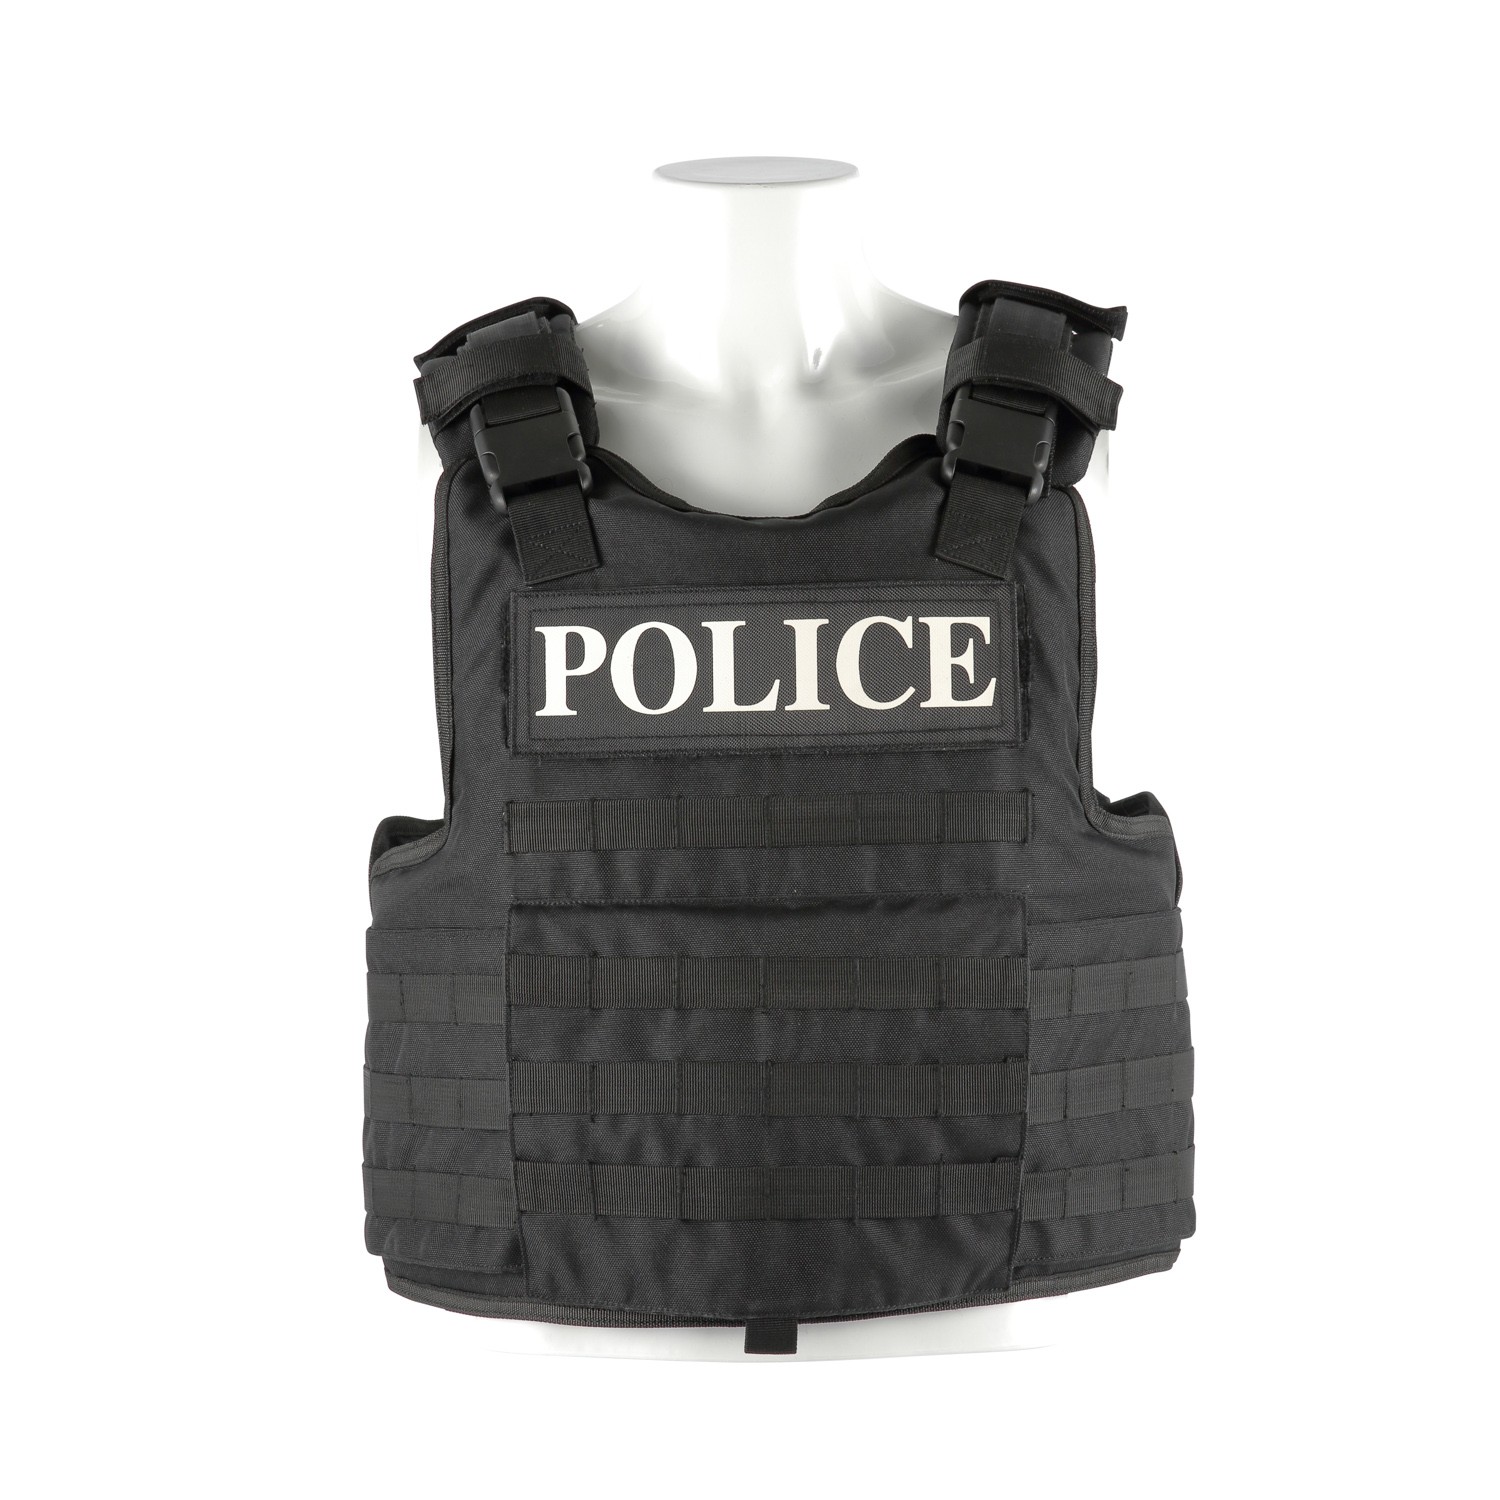 News - What are the functions of police equipment?